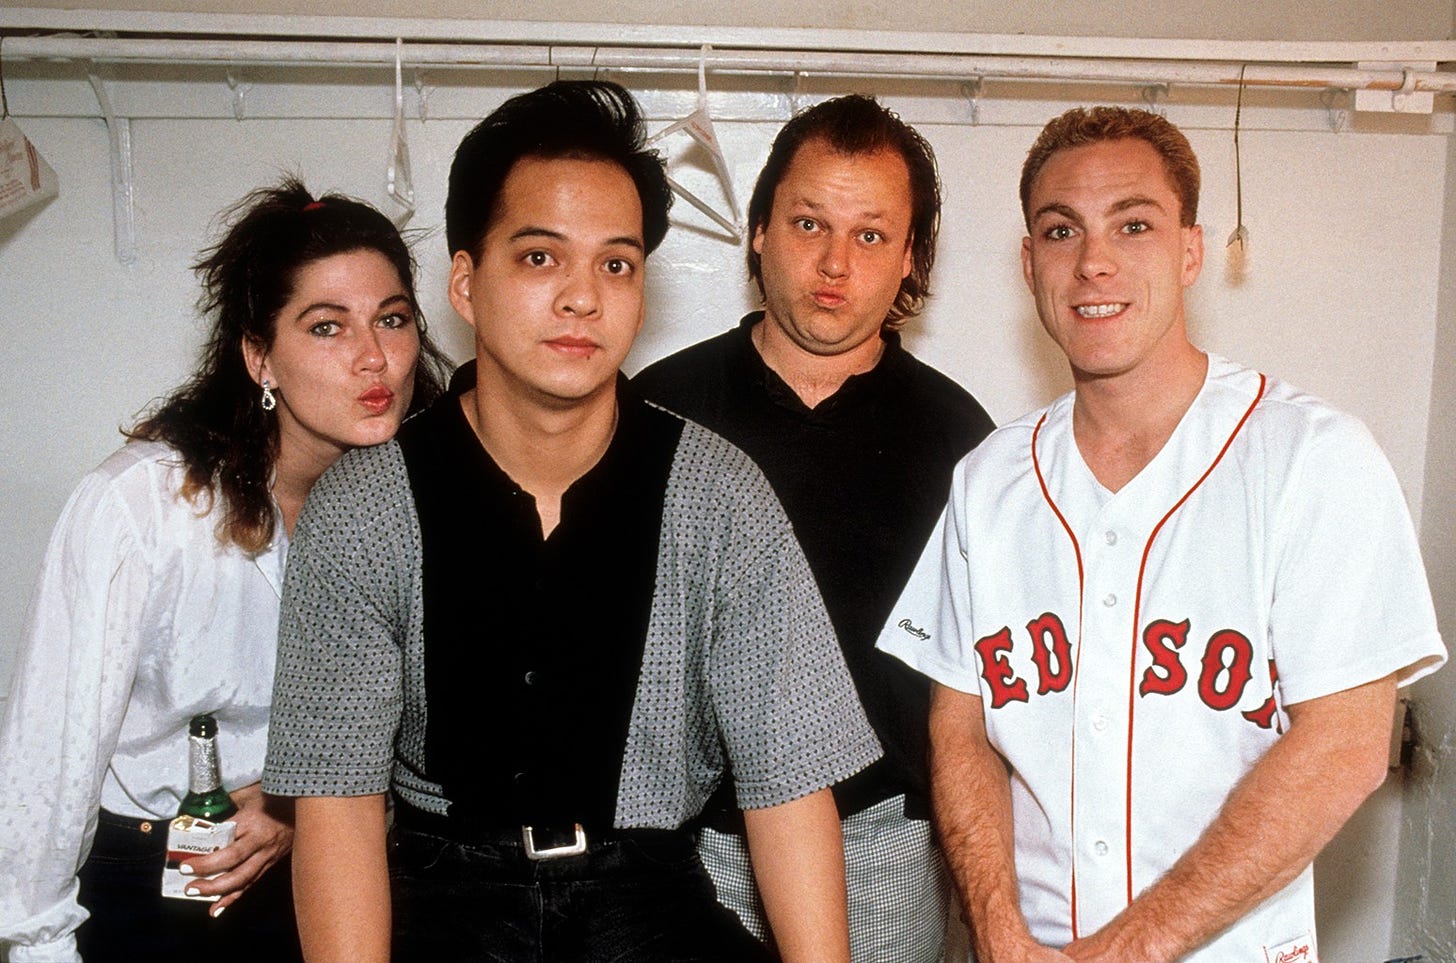 Left-Right: Kim Deal, Joey Santiago, Black Francis, and David Lovering. They're in what appears to be a changing room with a white wall; David and Joey are looking serious but Kim and Francis, standing slightly further back, are making strange faces.